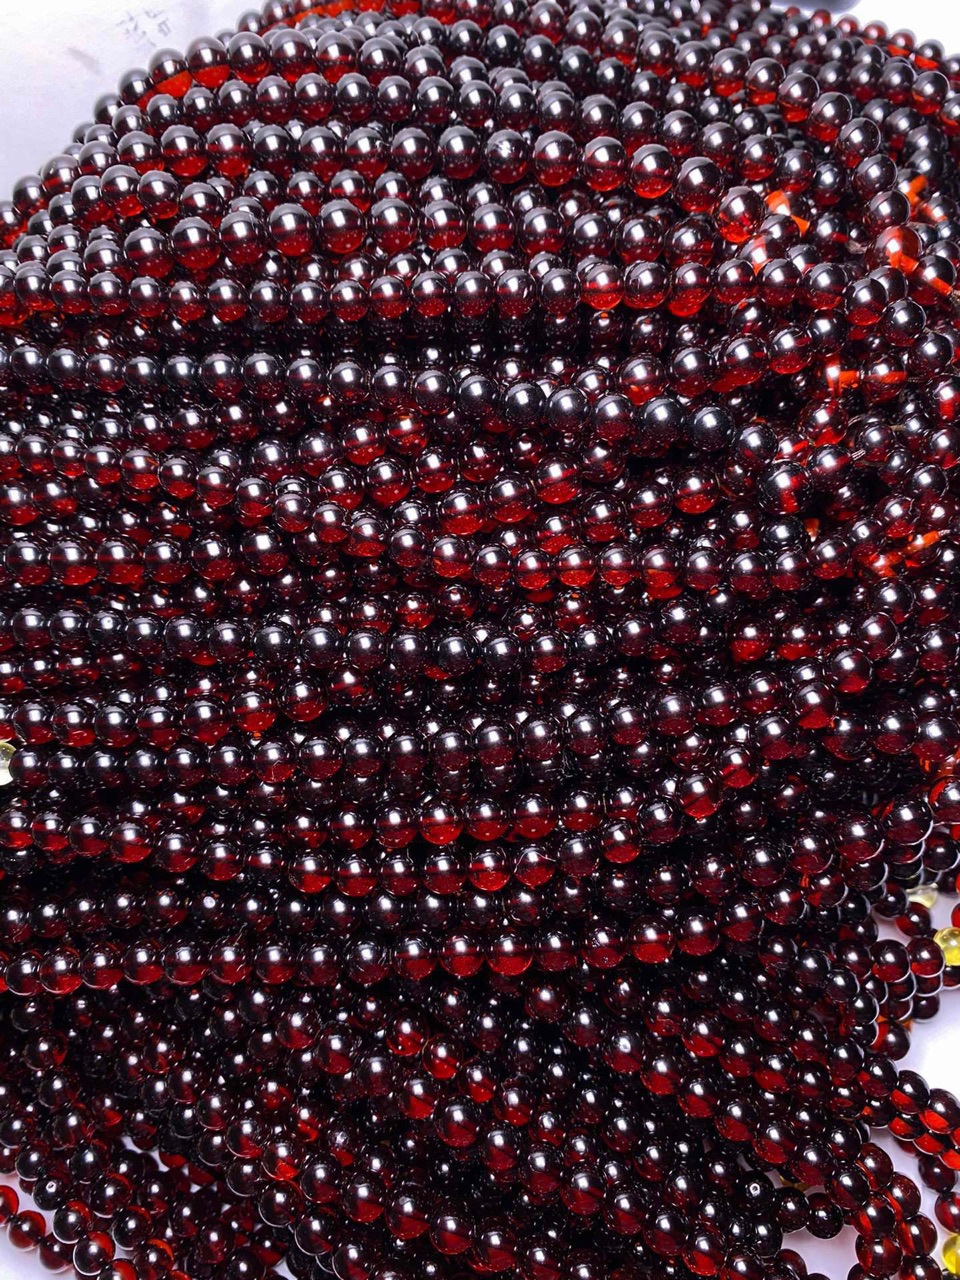 Factory direct Battalion Ore beeswax Claret Water Blood Perot 108 Beads Blood amber beads Amber 108